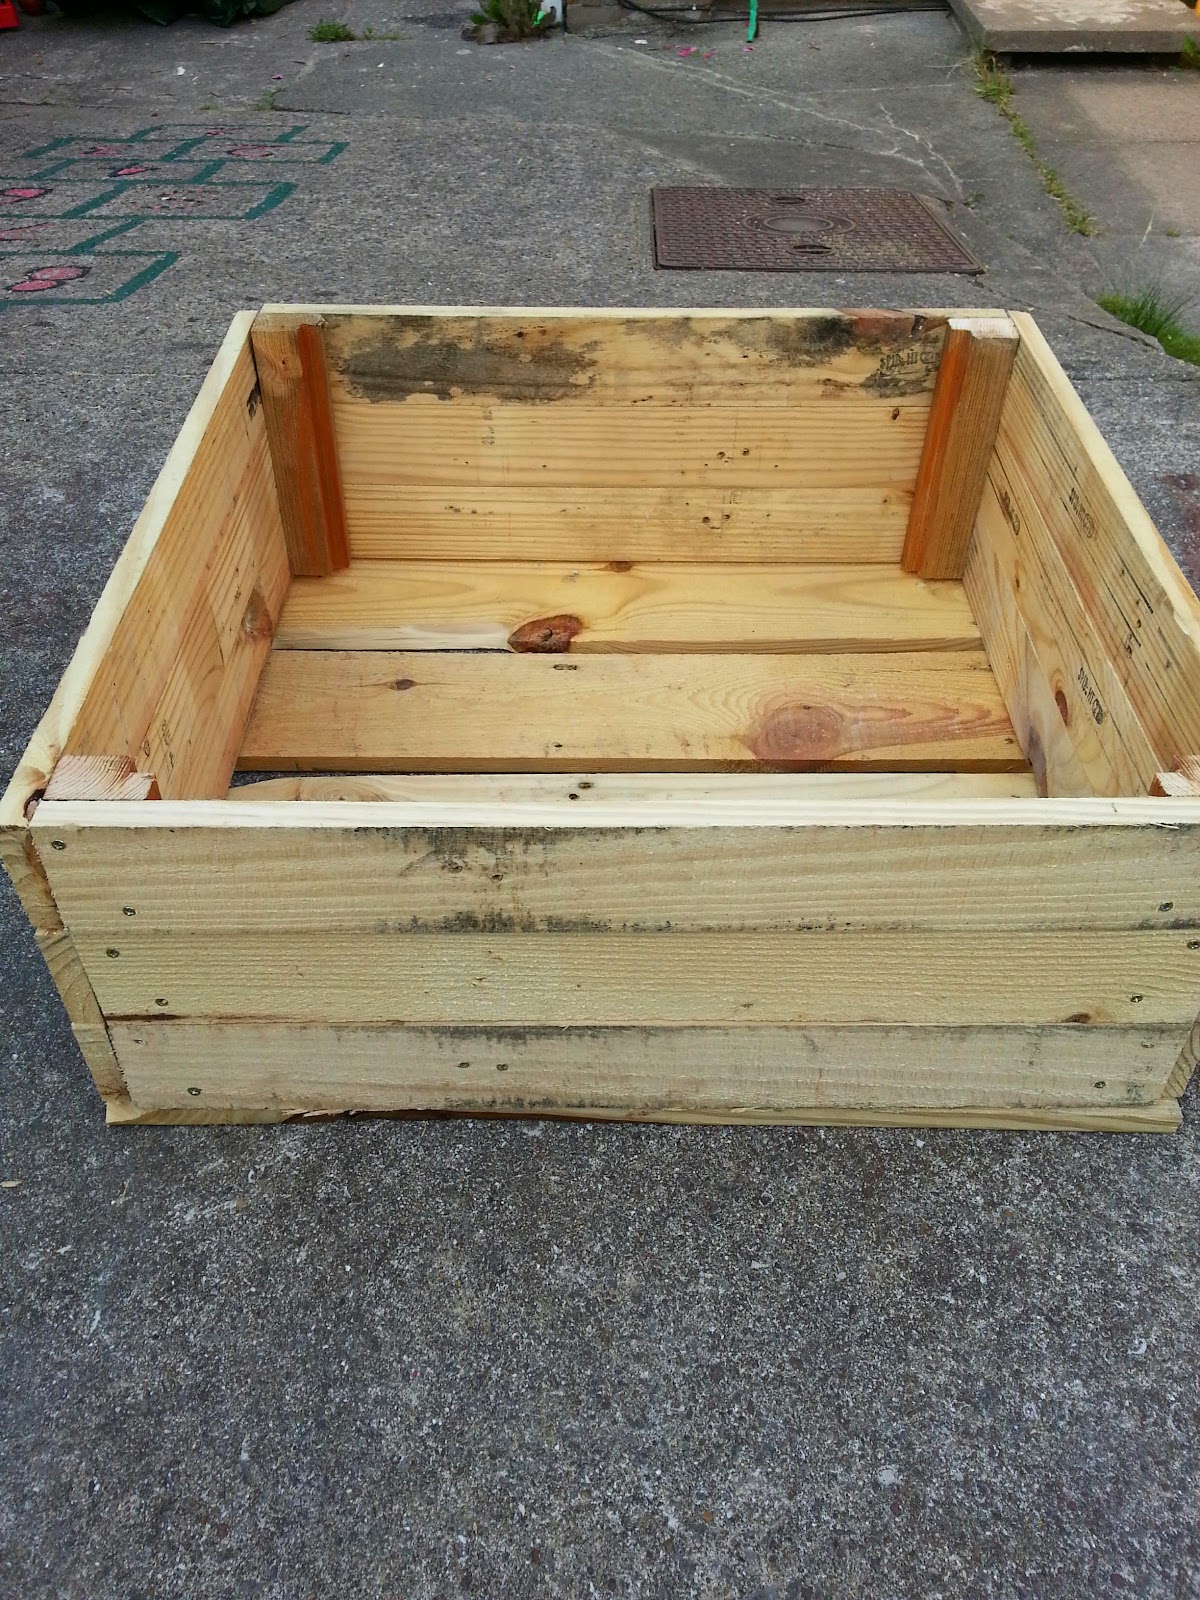 Wooden Pallet Garden Projects: Pallet Wooden Boxes 2